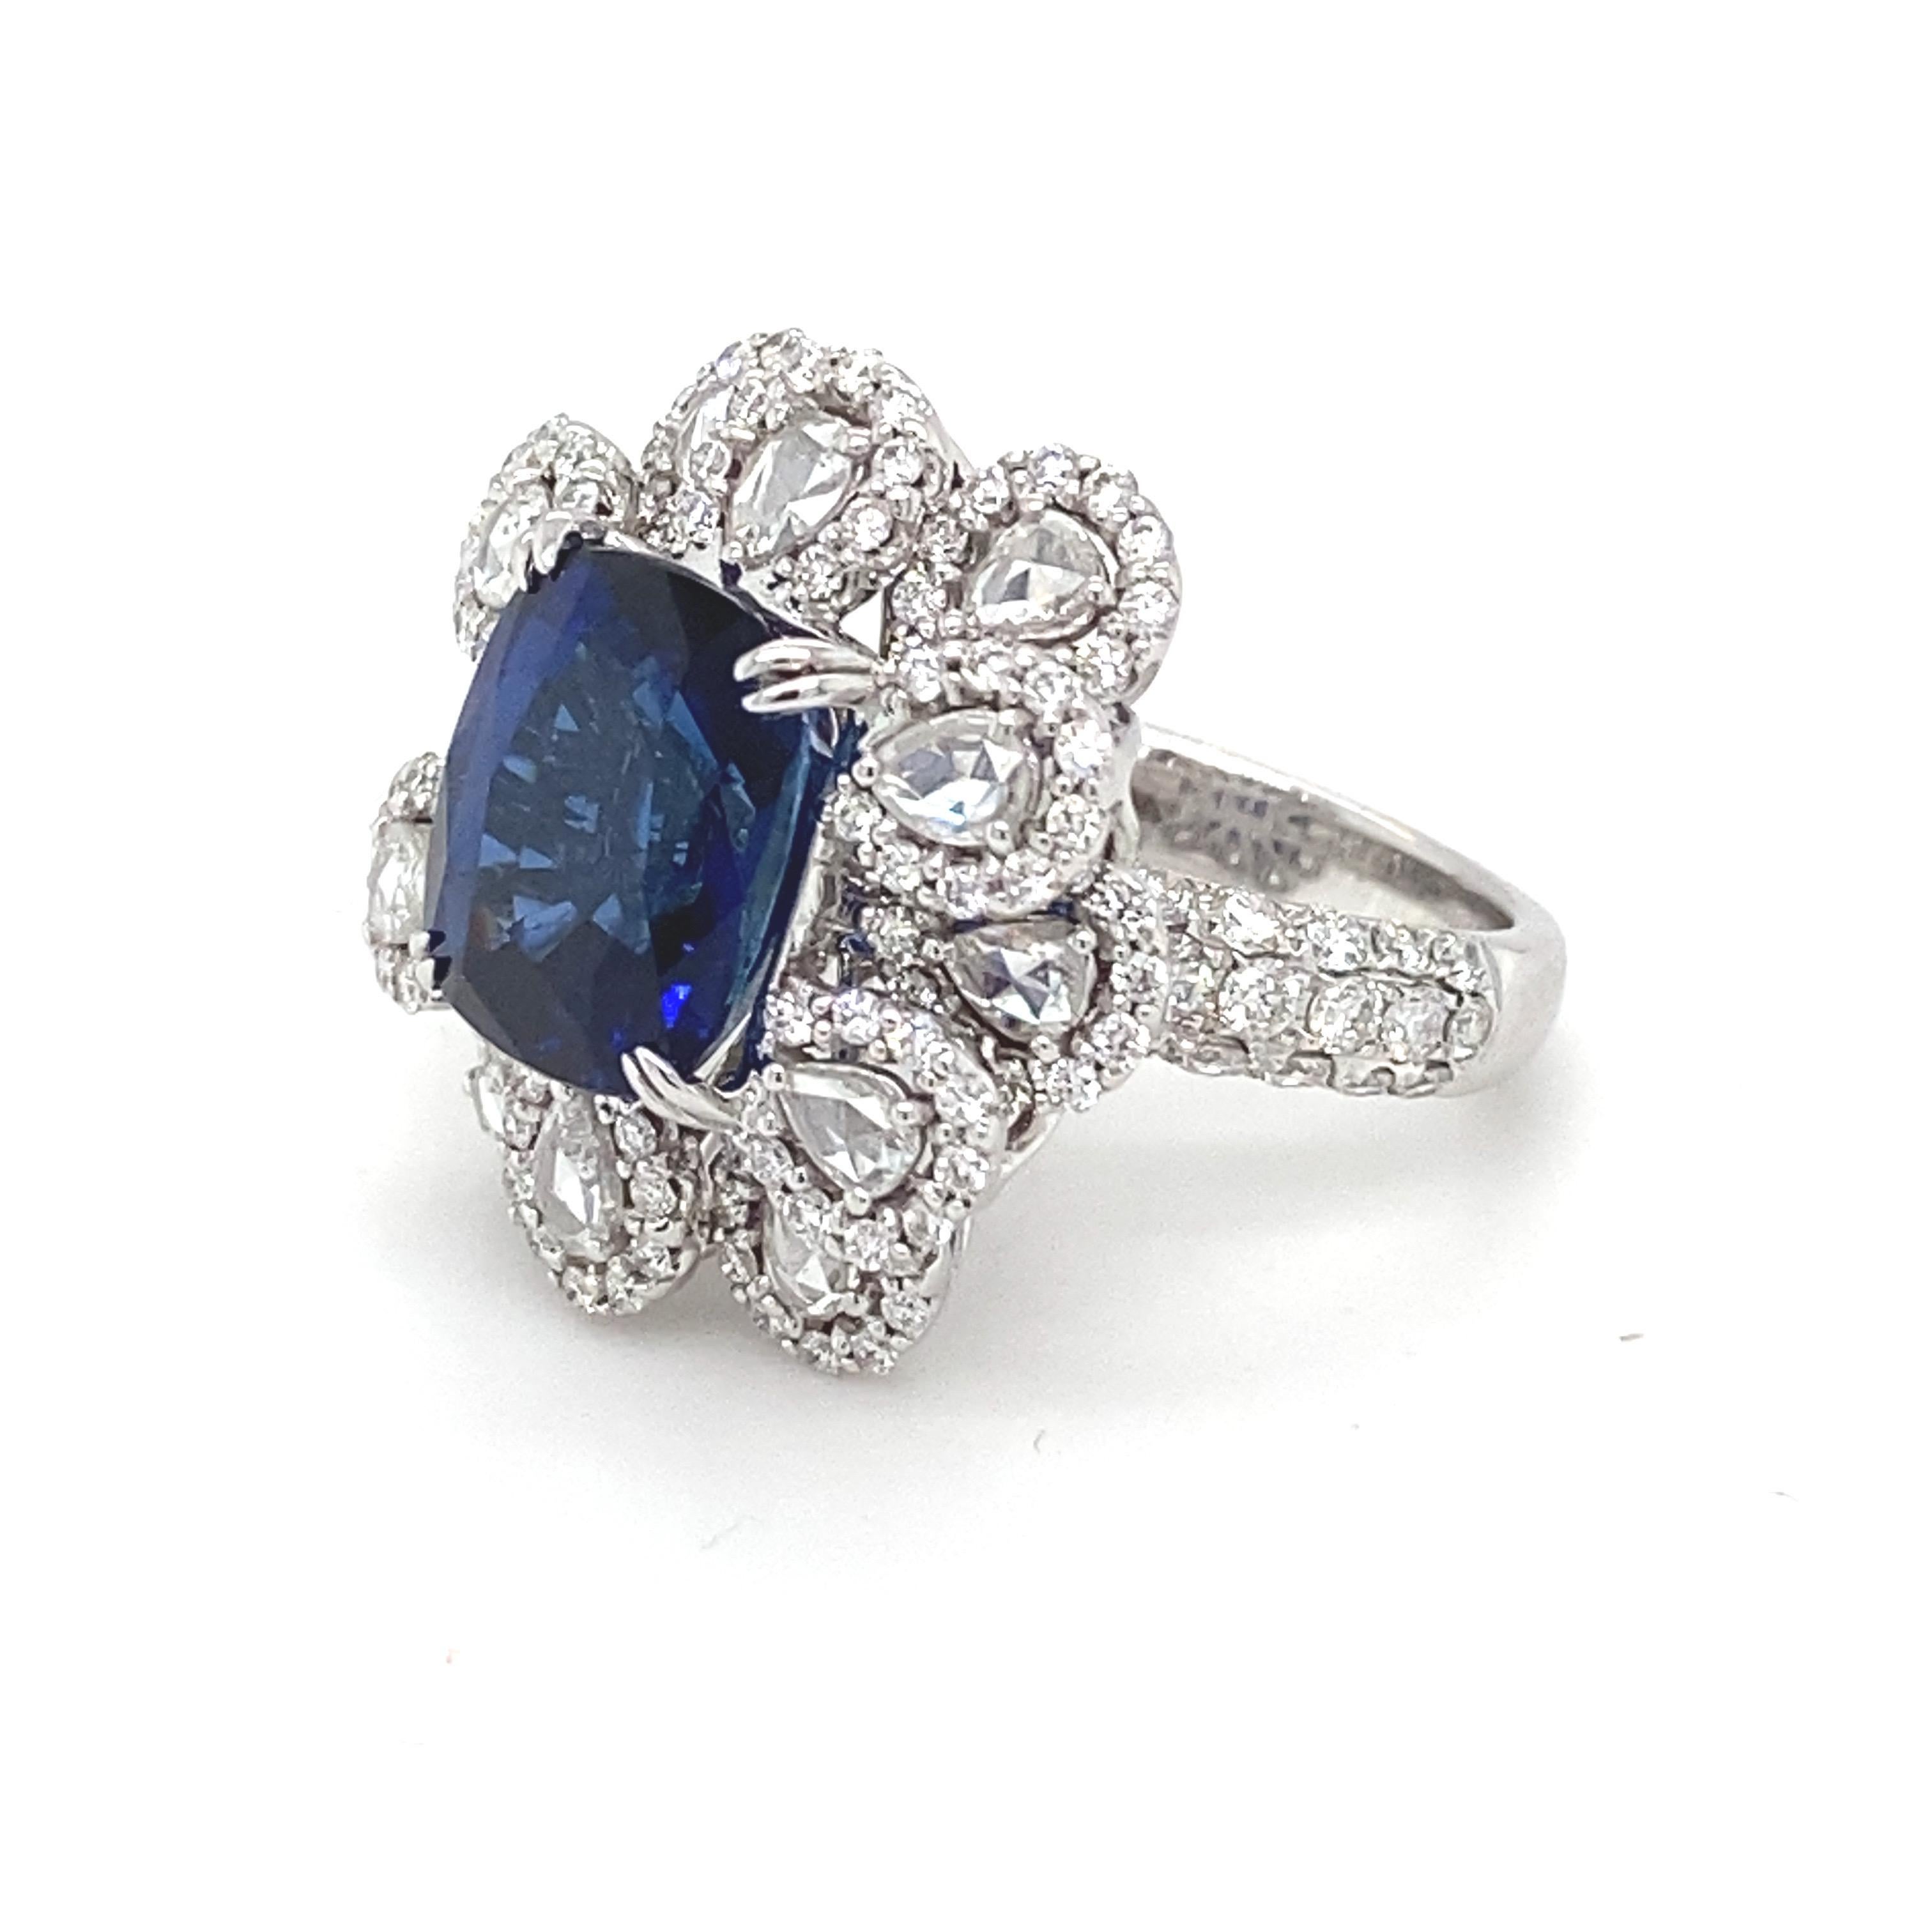 GIA Certified 7.87 Carat Cushion Shape Blue Sapphire Diamond 18K Engagement Ring For Sale 9